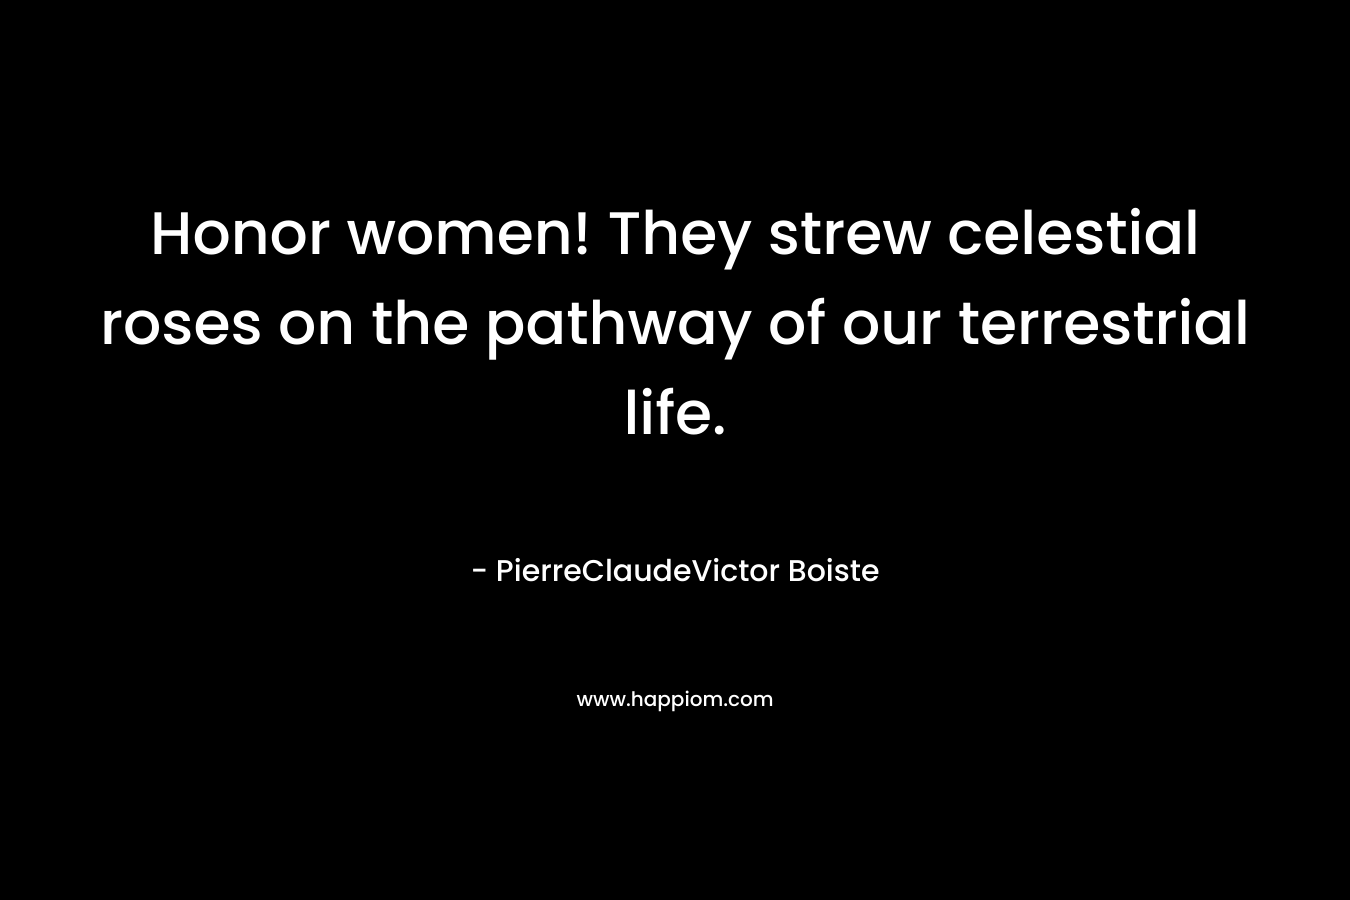 Honor women! They strew celestial roses on the pathway of our terrestrial life.